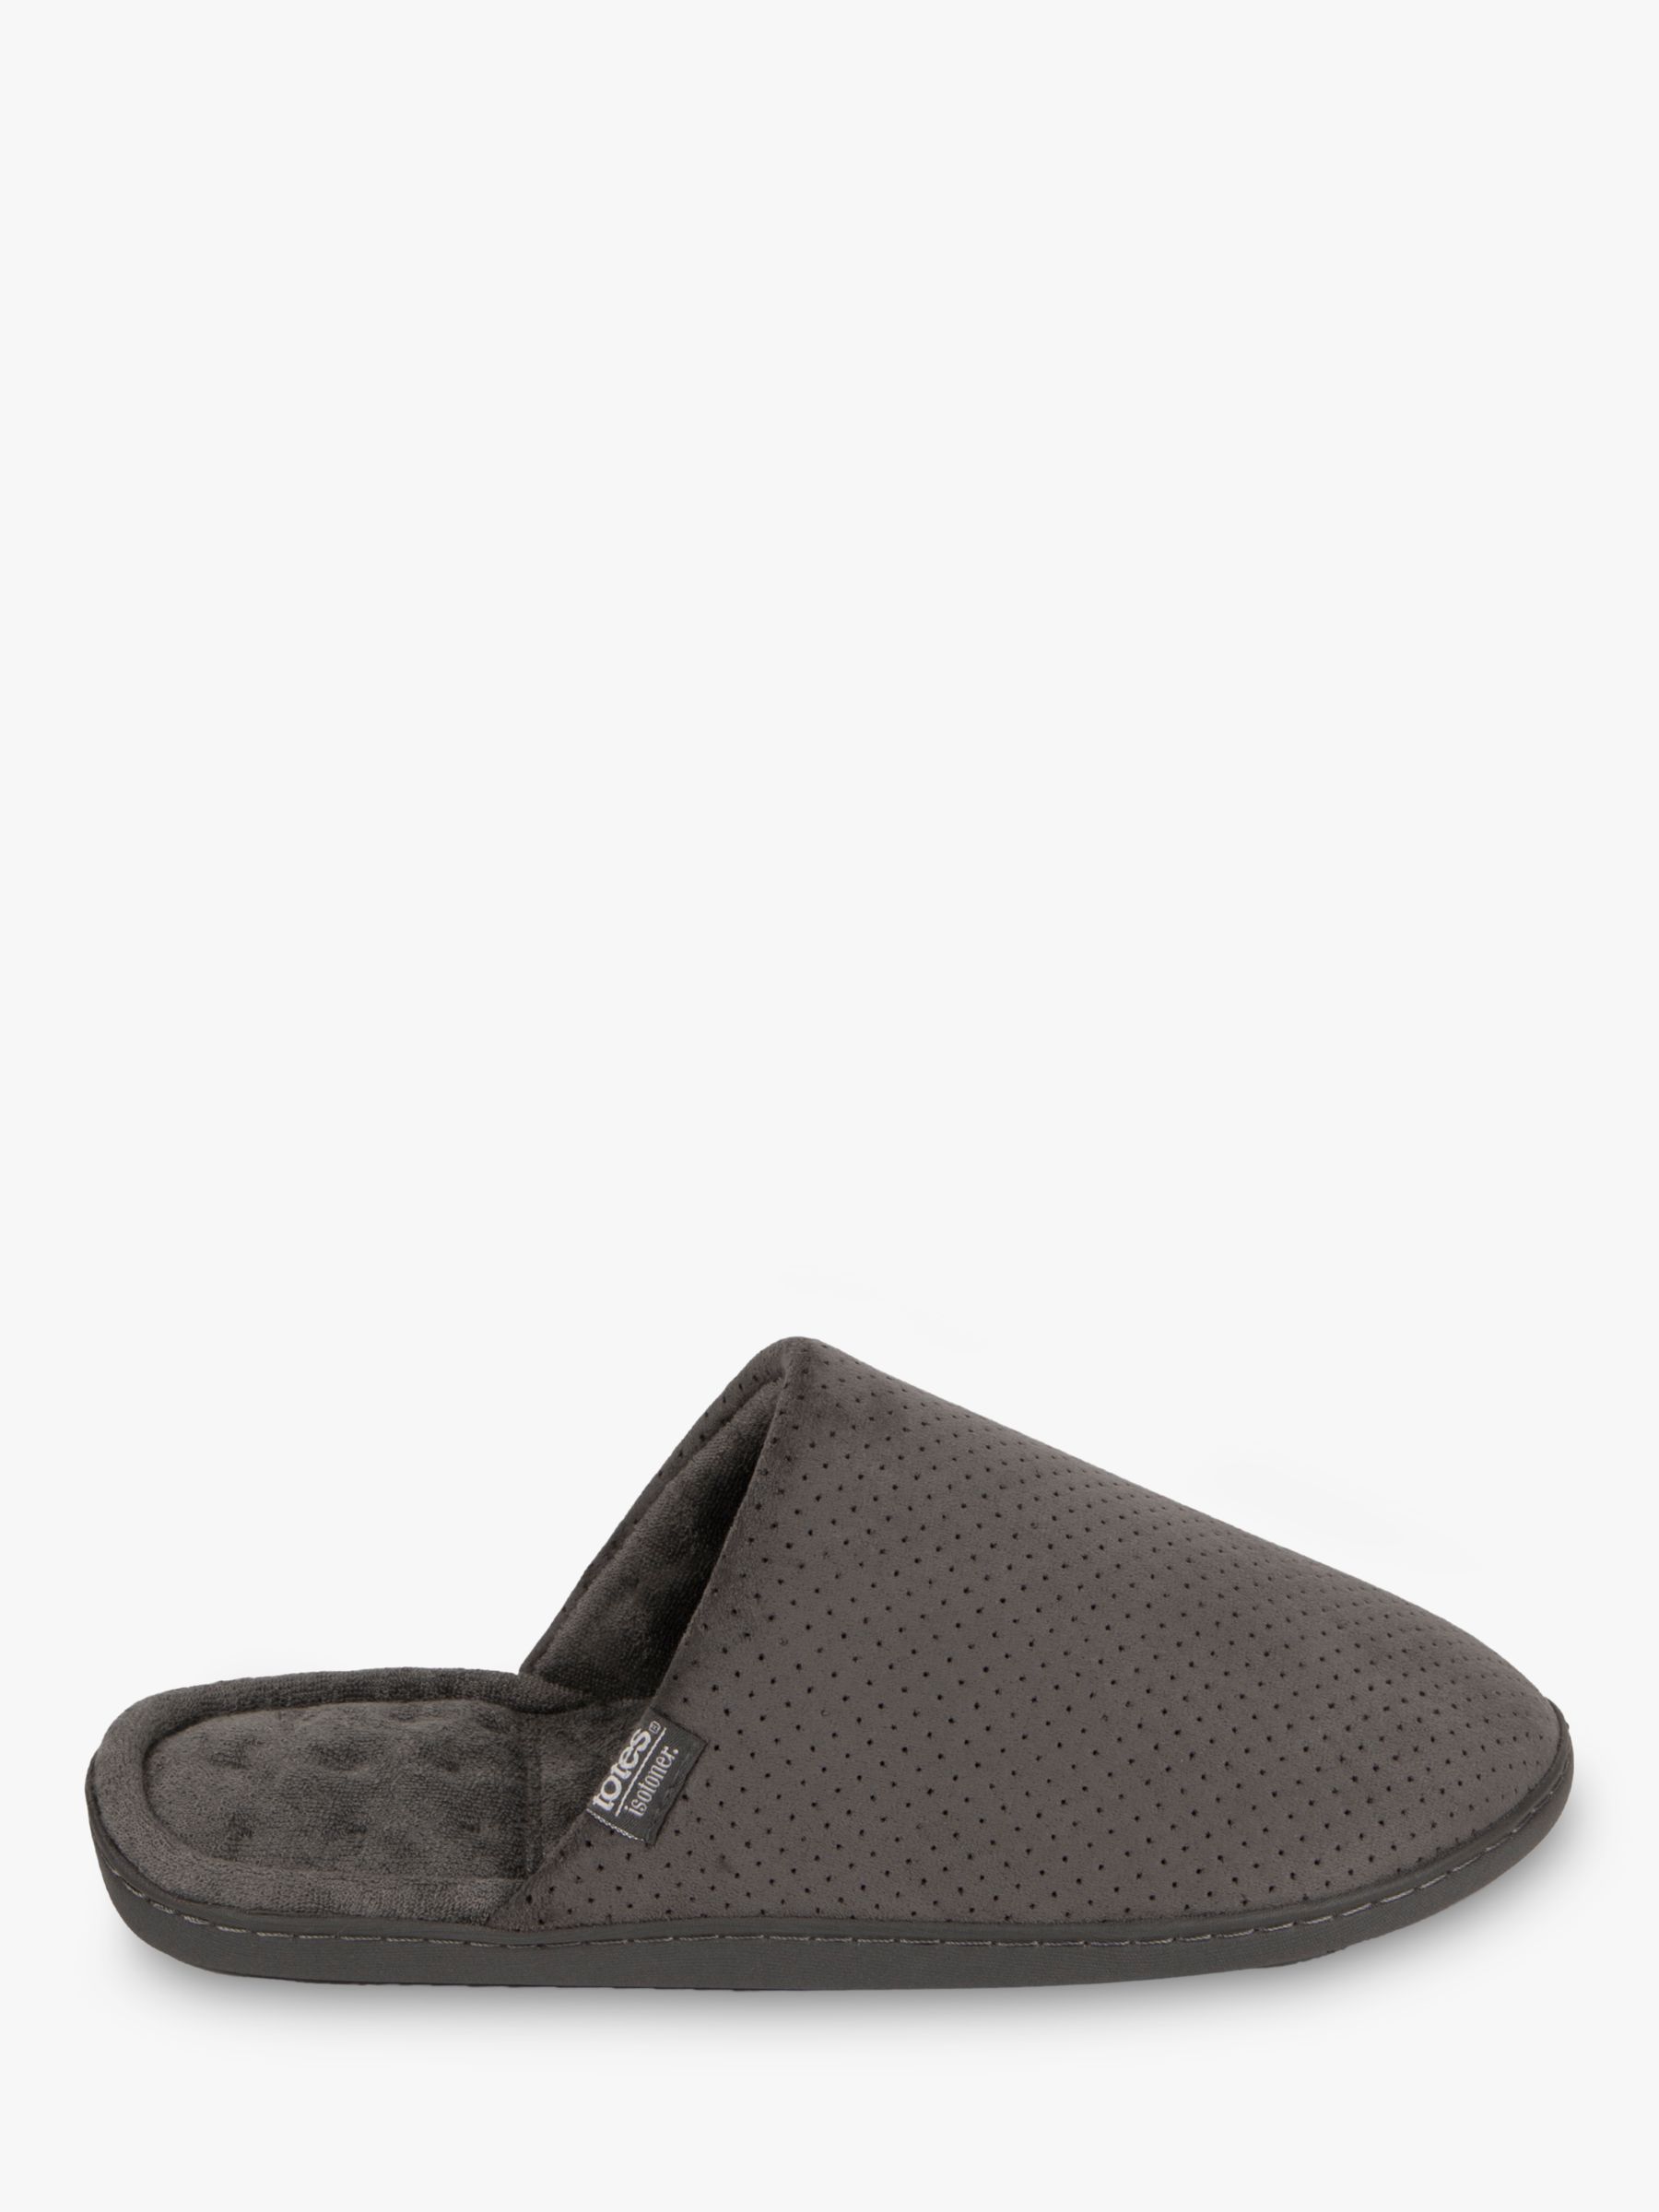 Suedette Mule Slippers, Grey at Lewis &